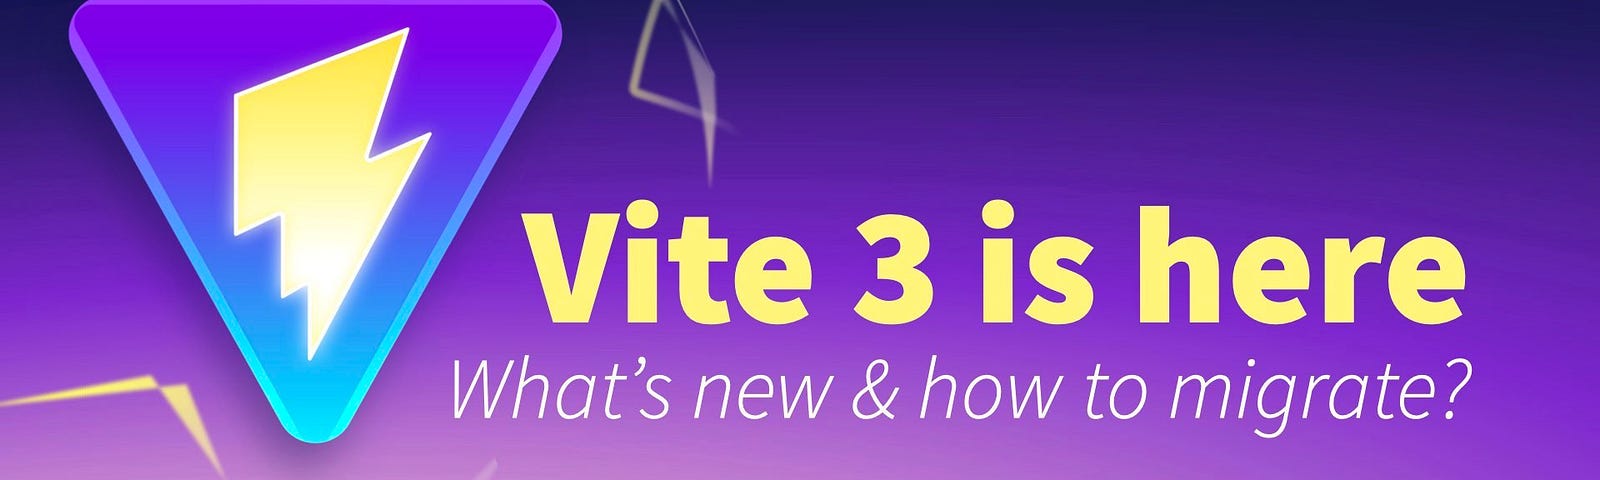 Vite 3 is here! What’s new & how to migrate?